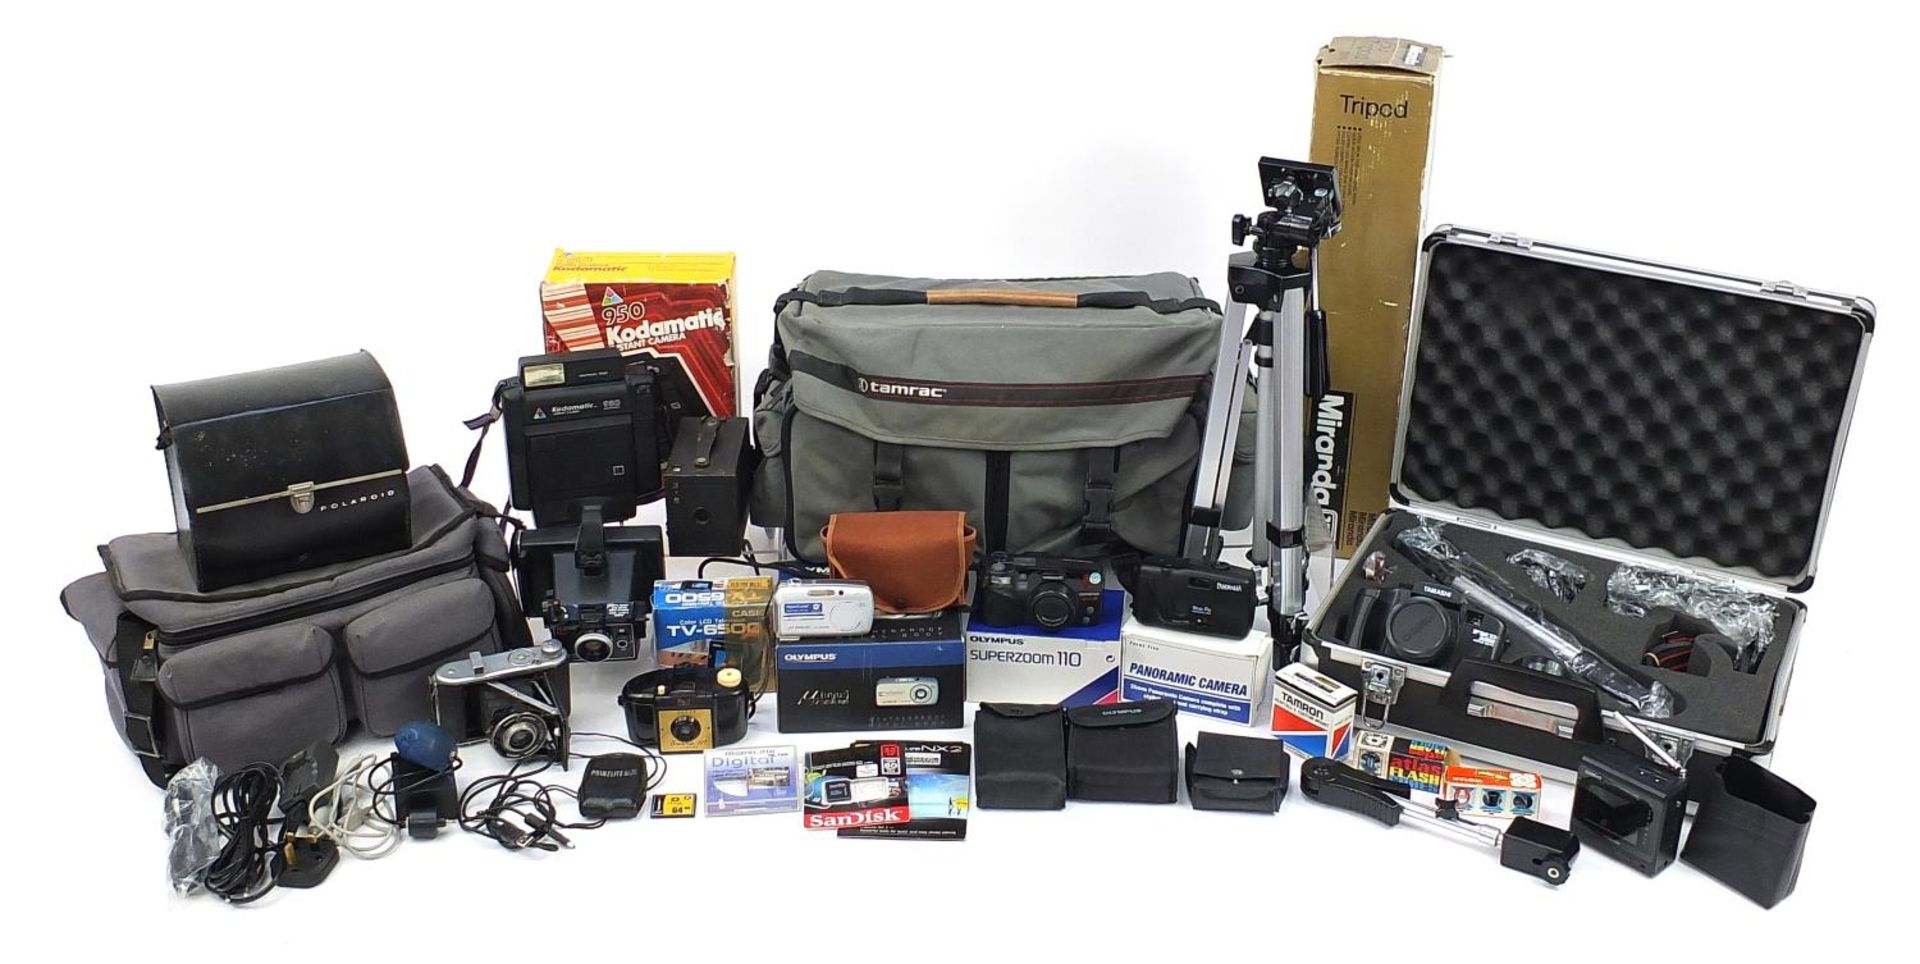 Collection of vintage and later cameras, lenses and accessories including Tamashi FMD with tripod